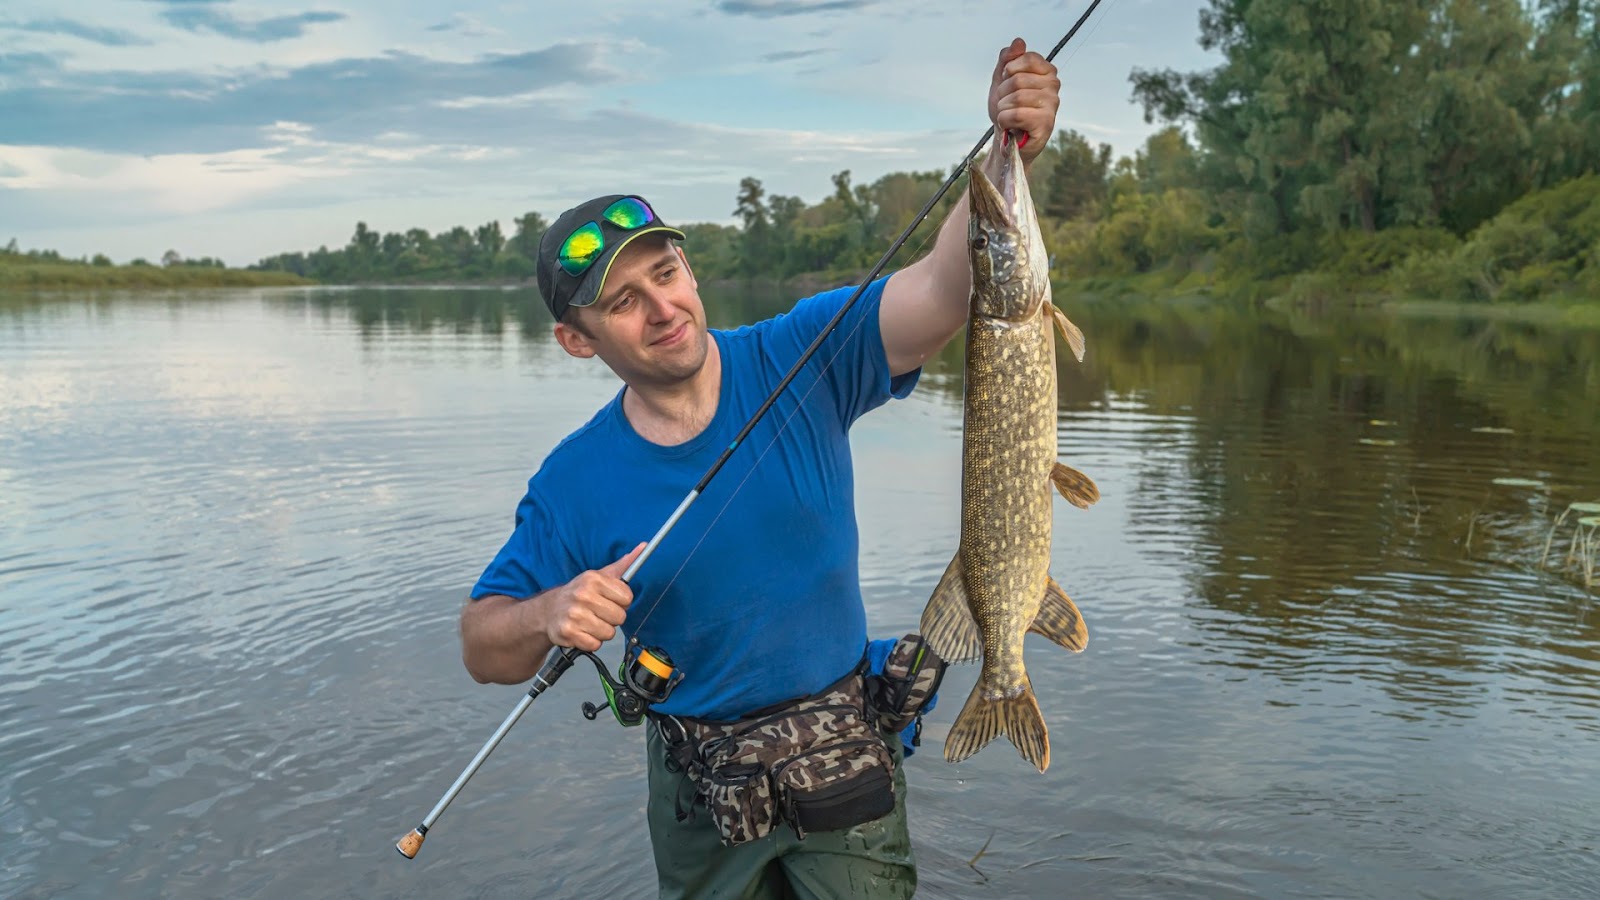 The challenges of Pike fishing